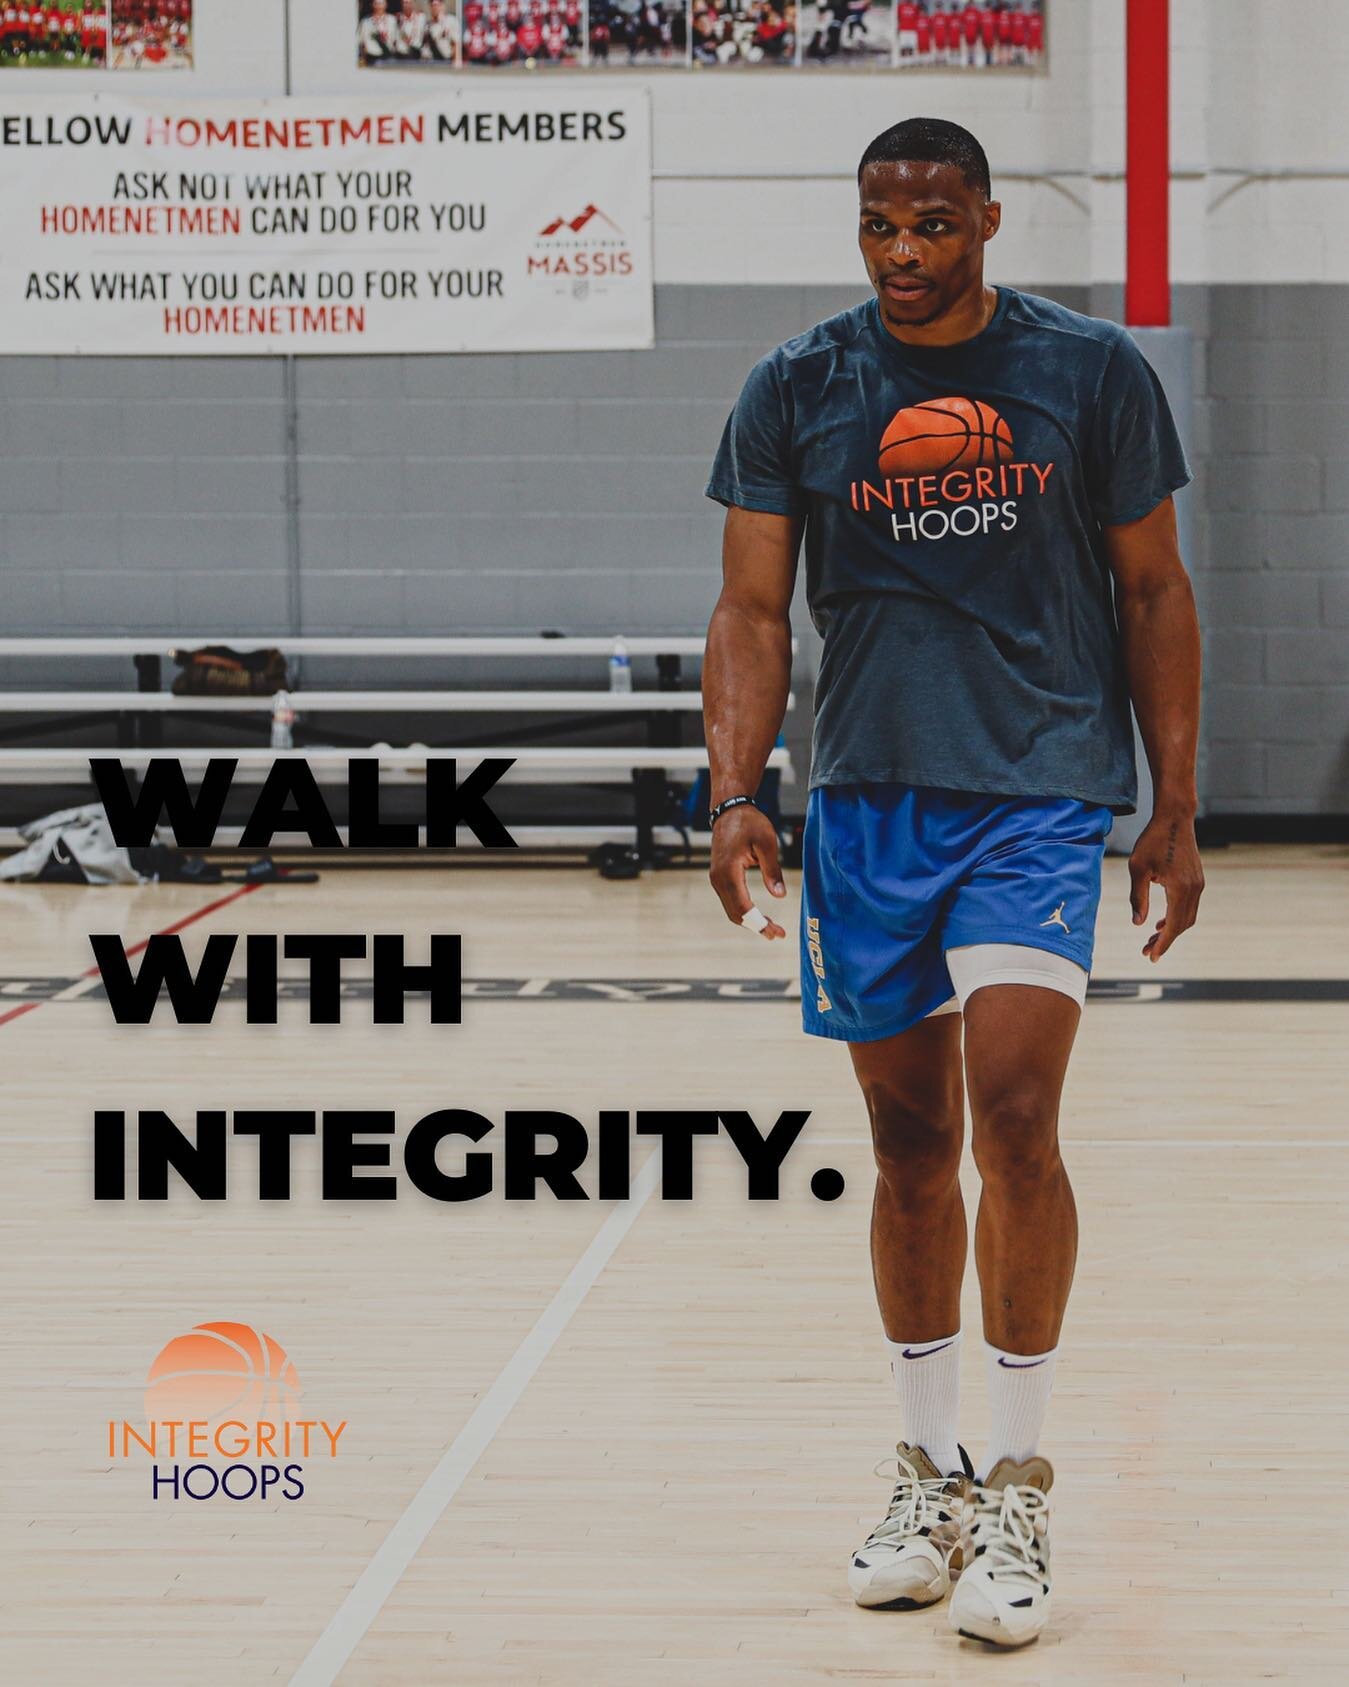 Get your Integrity Hoops Merch and #WalkWithIntegrity.

🏀 integrityhoops.com